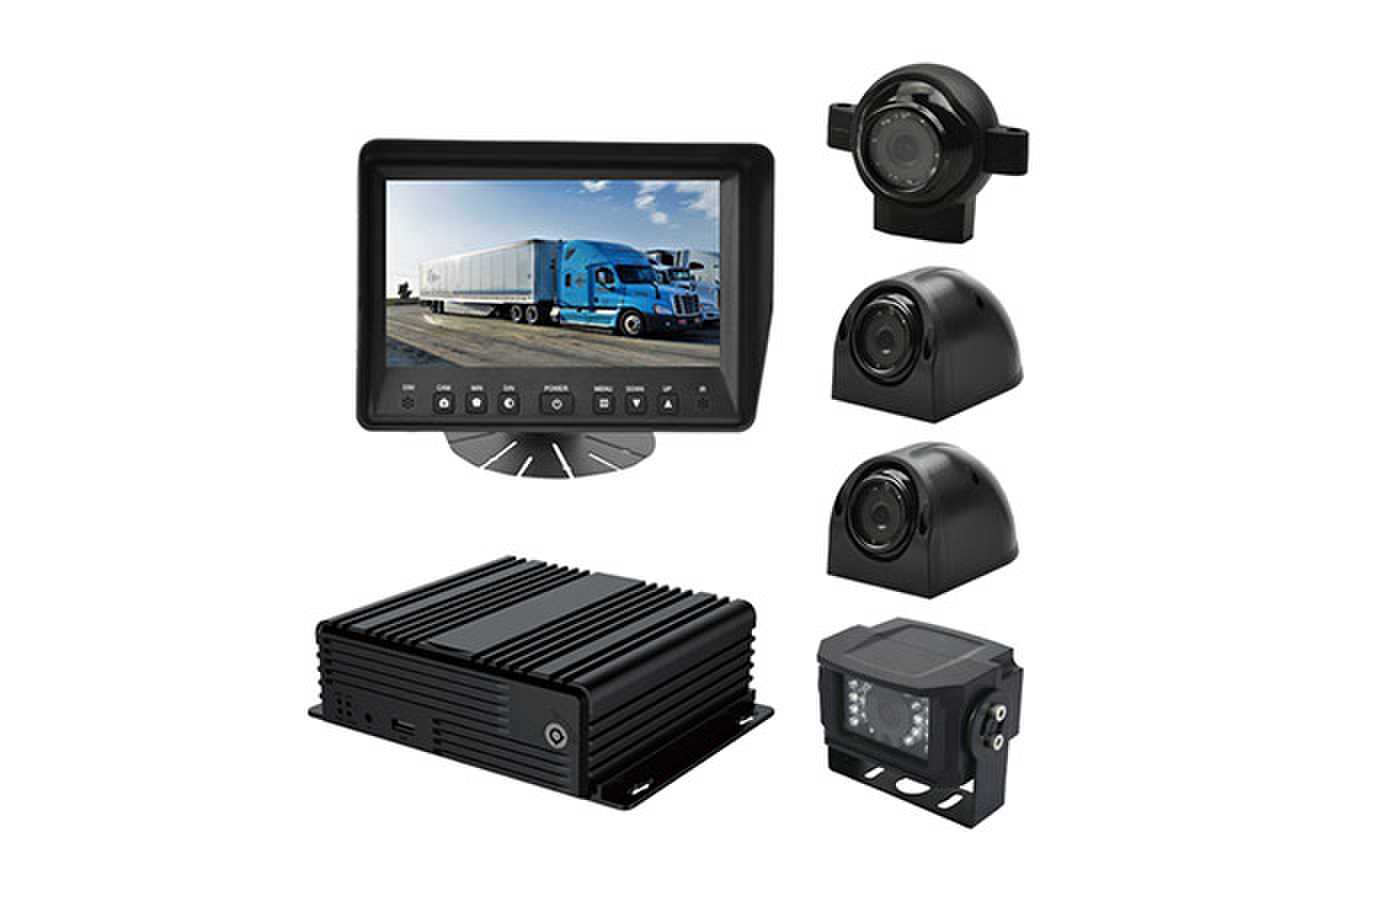 What is the function of mobile DVR?